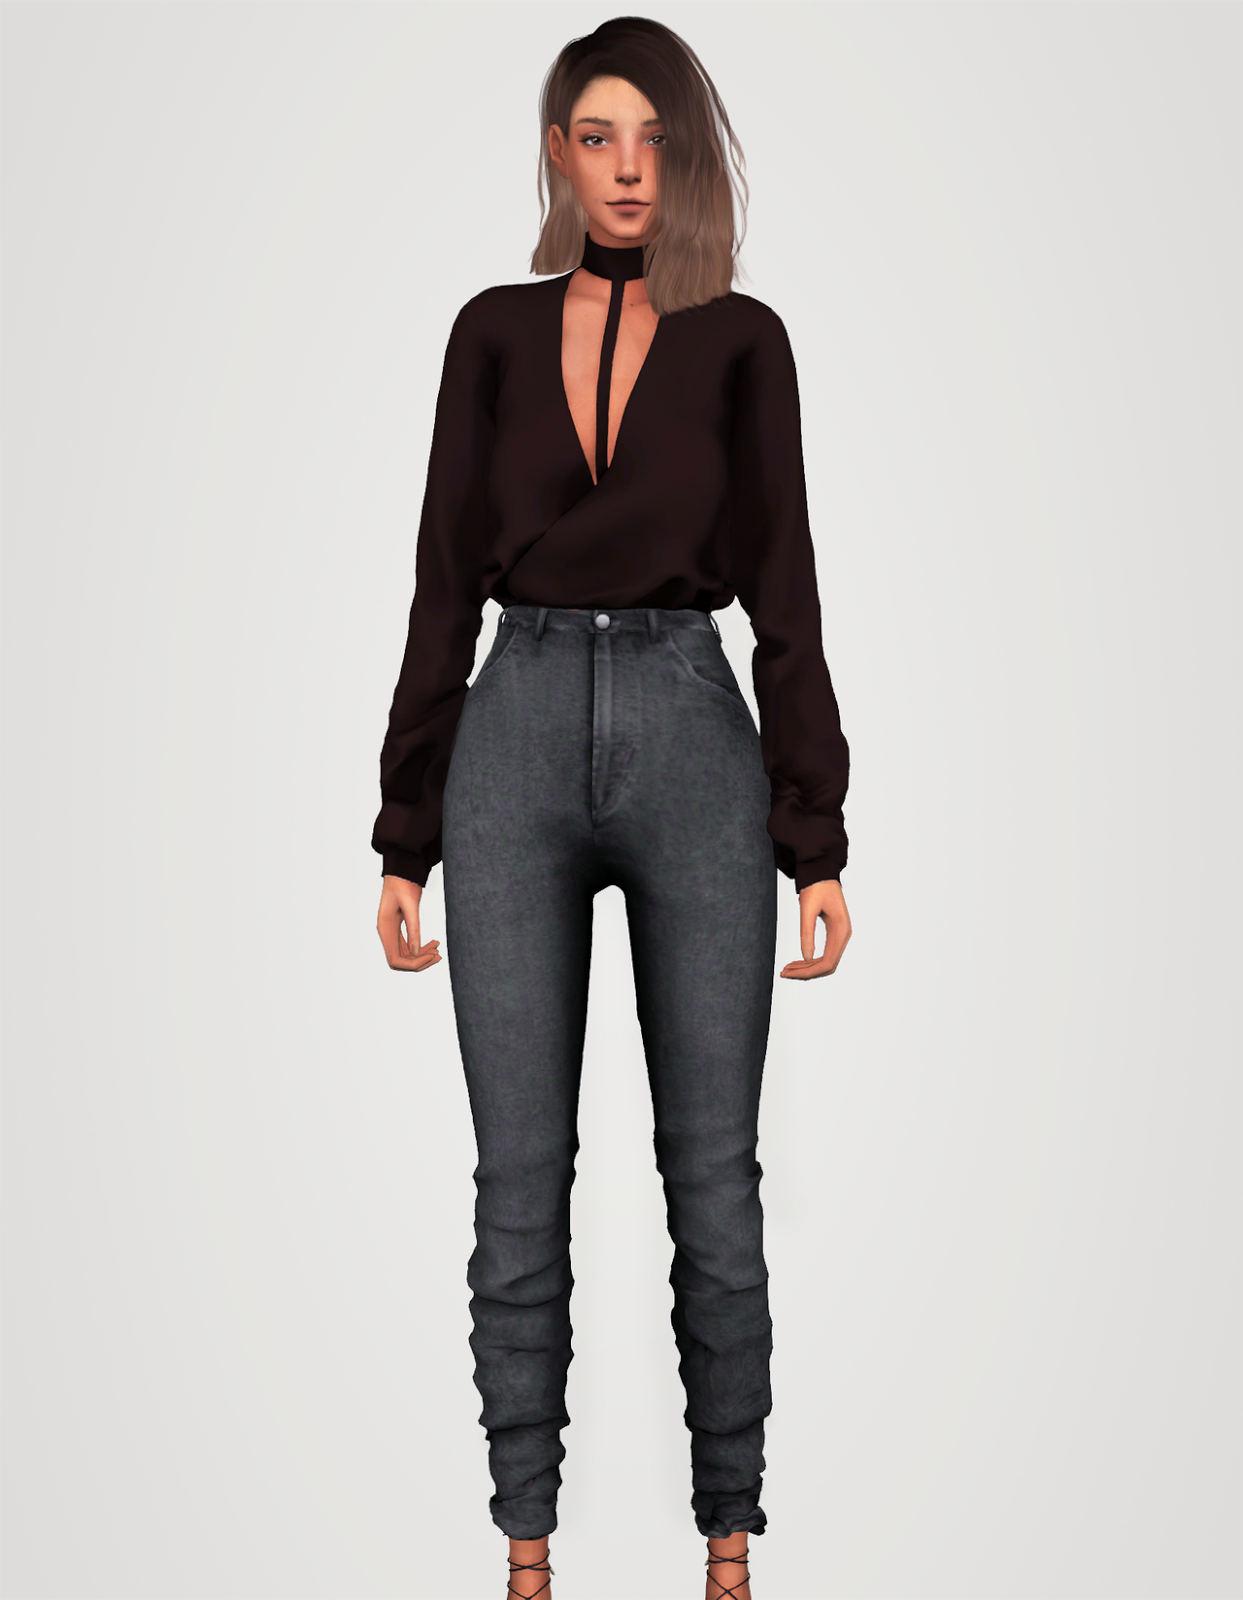 Sims 4 CC's - The Best: Clothing by Elliesimple